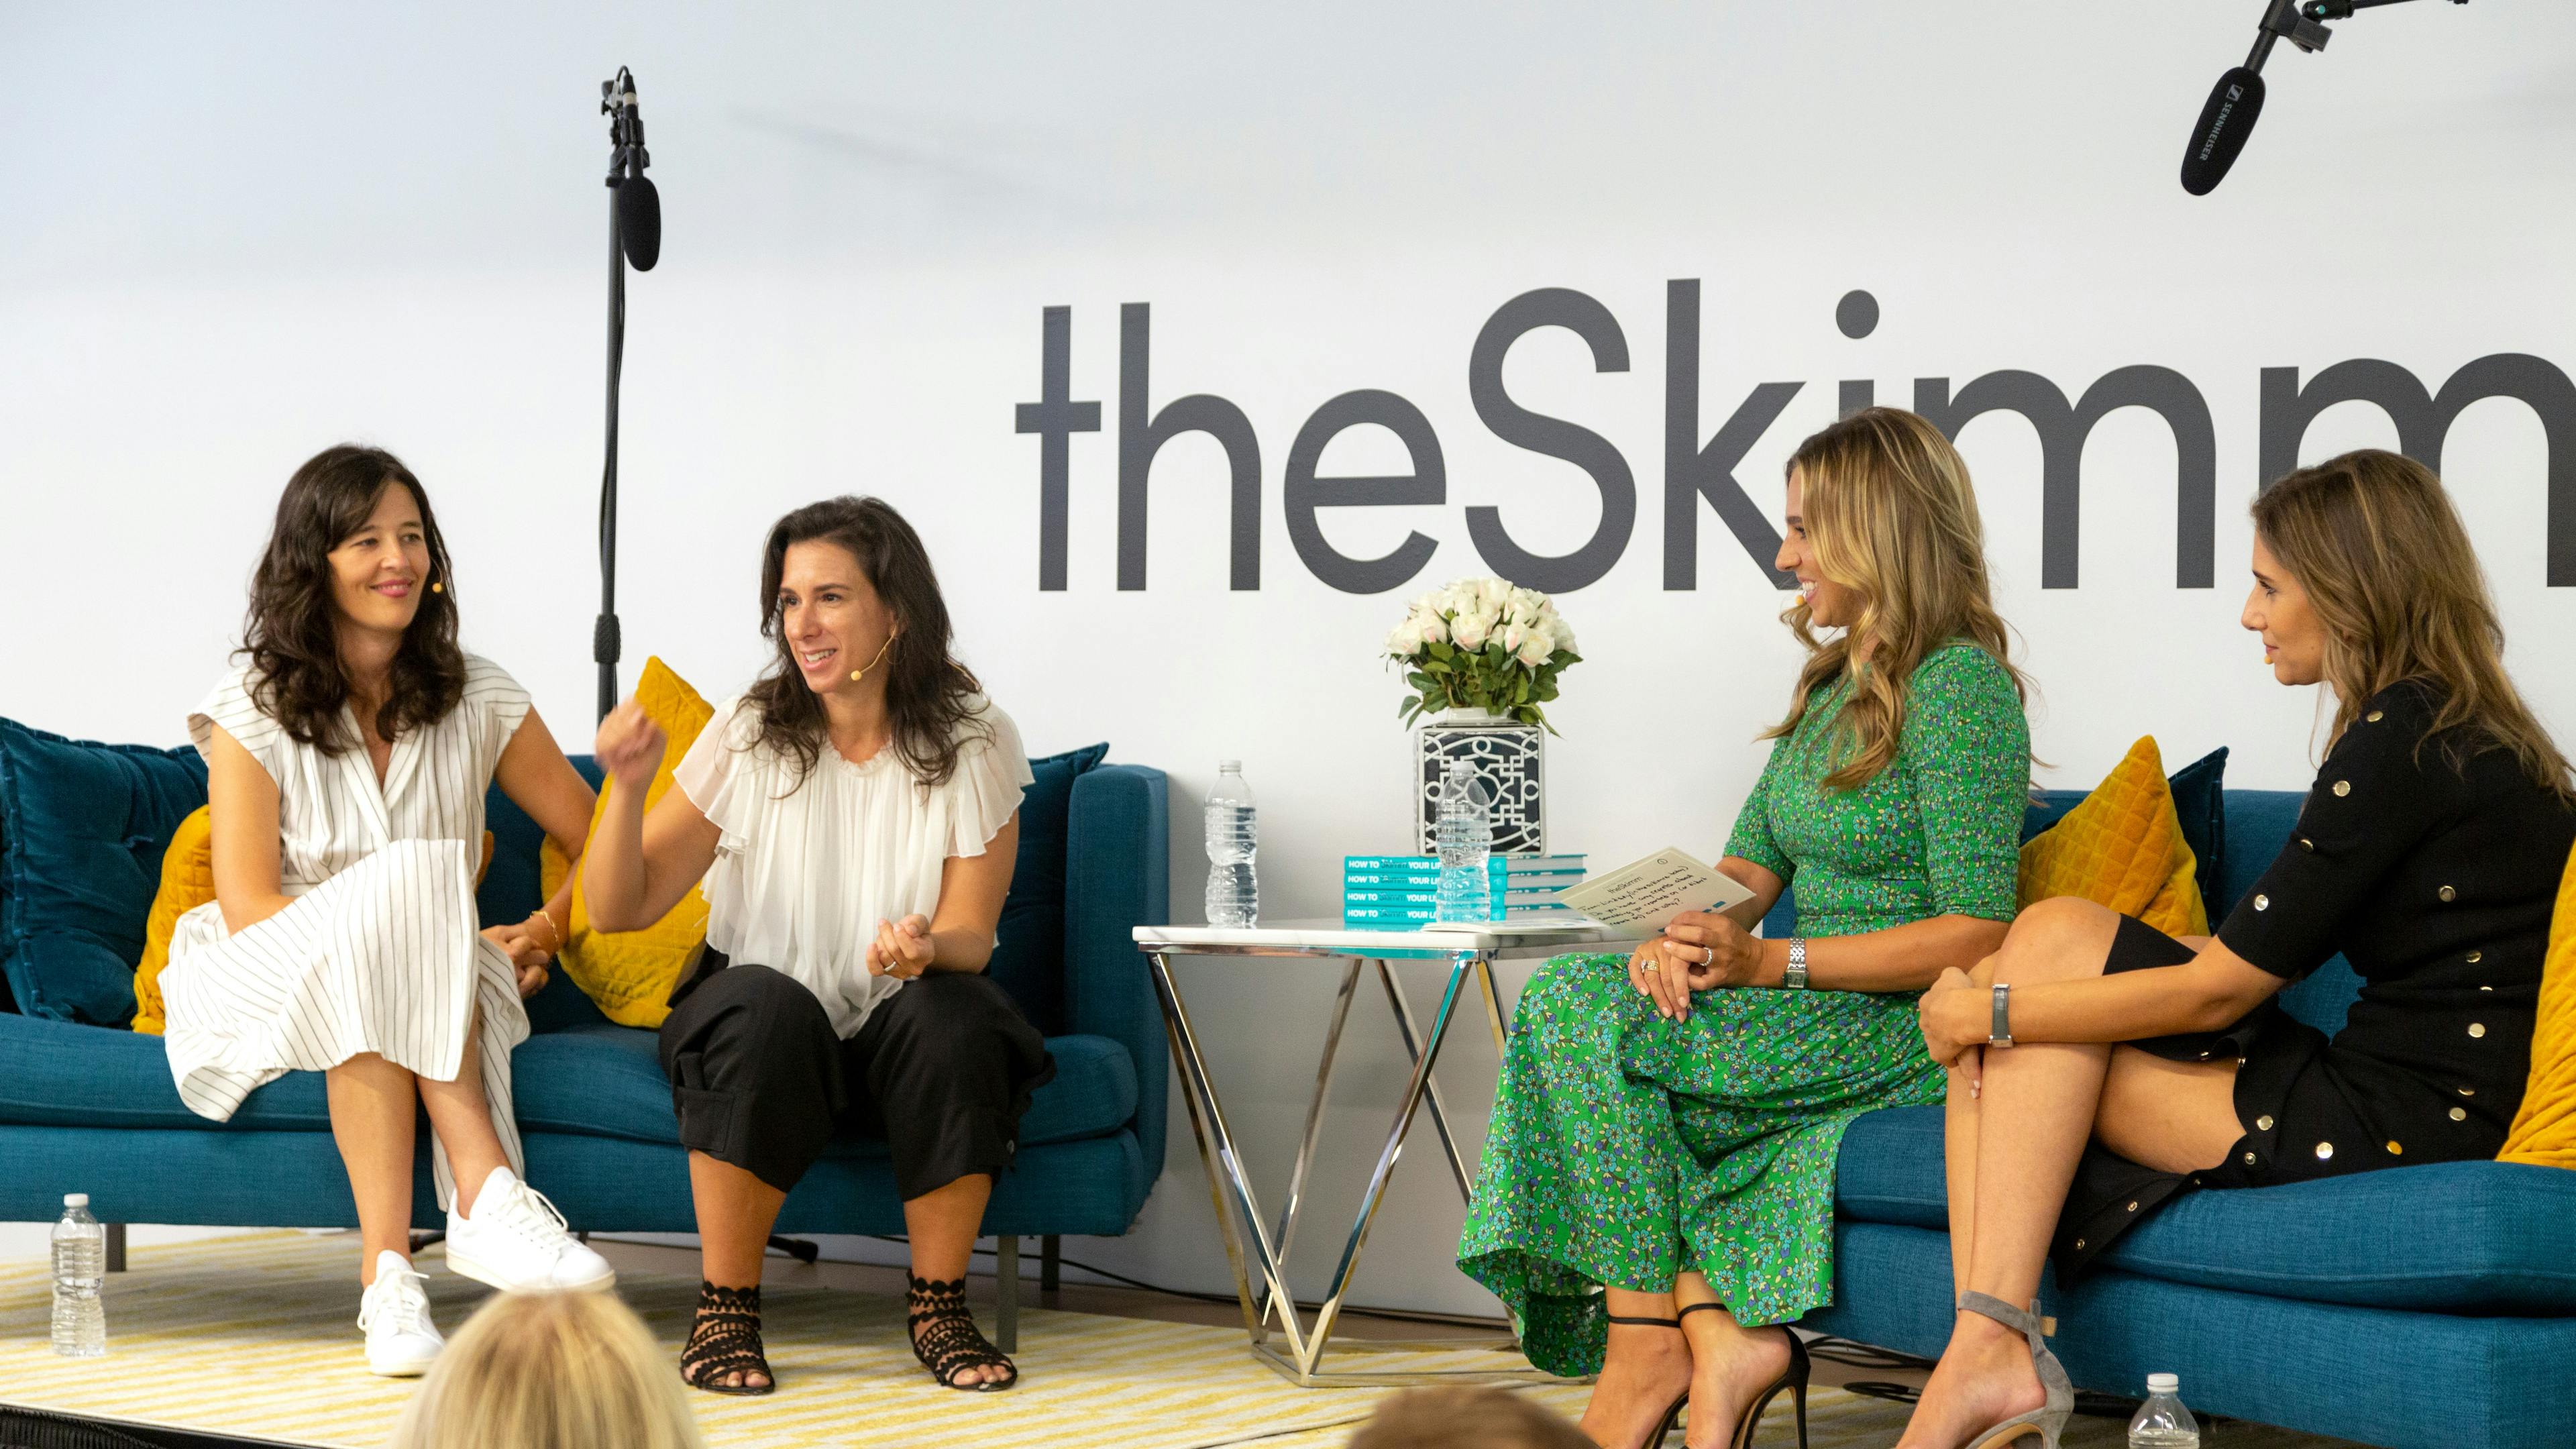 Megan Twohey and Jodi Kantor chat with theSkimm co-founders and co-CEOs Danielle Weisberg and Carly Zakin at Skimm HQ on Sept. 13, 2019.